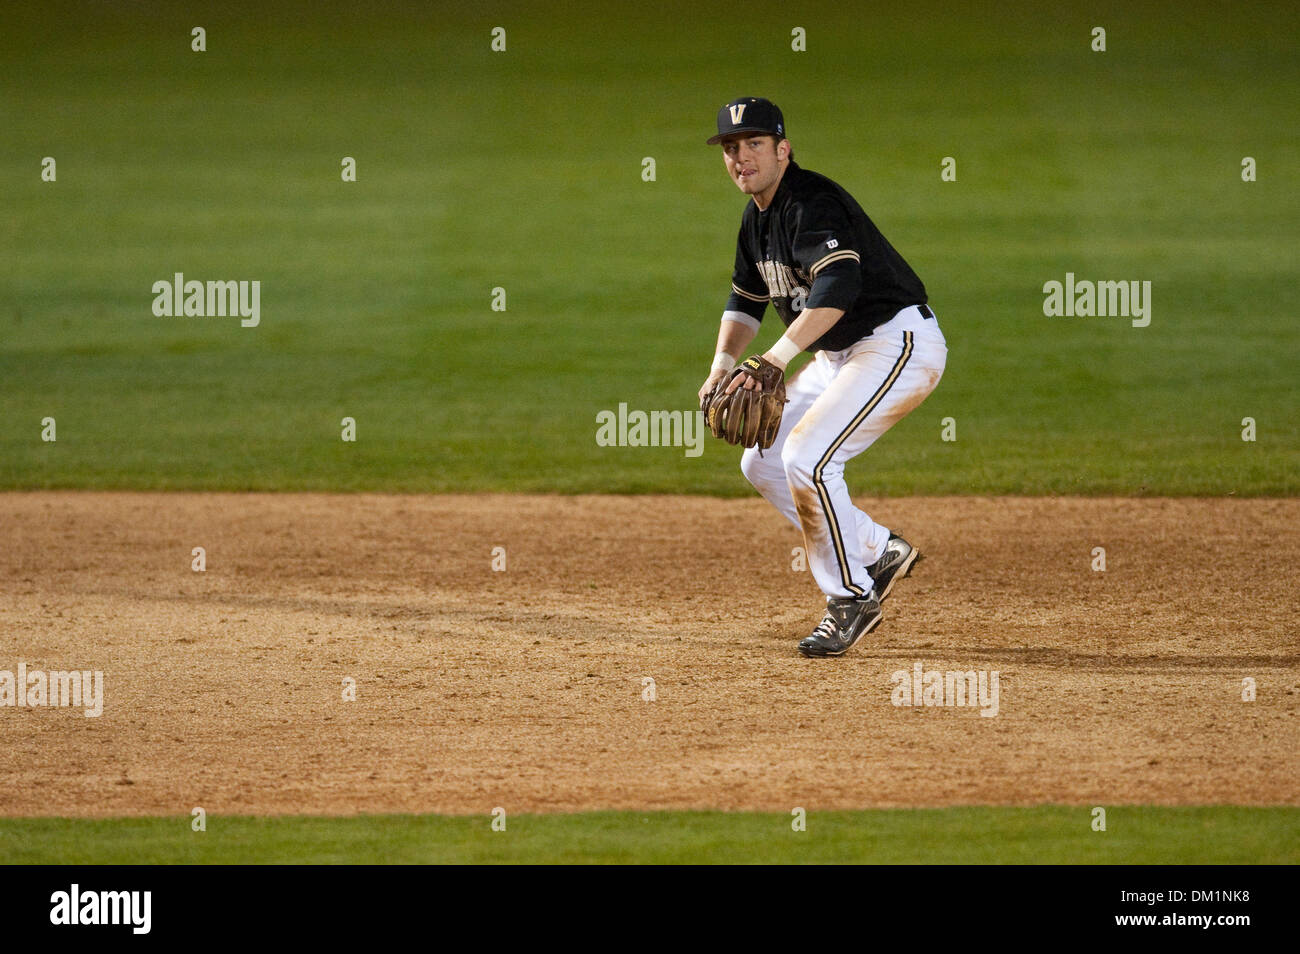 Feb. 26, 2010 - Los Angeles, California, U.S - 26 February 2010: Vanderbilt shortstop Brian Harris (6) fields a grounder against UCLA.  The Vanderbilt Commodores lost to the UCLA Bruins by a score of 9-2  as part of the Inaugural Dodgertown Classic at Steele Field at Jackie Robinson Stadium in Los Angeles, California..Mandatory Credit: Andrew Fielding / Southcreek Global (Credit Im Stock Photo